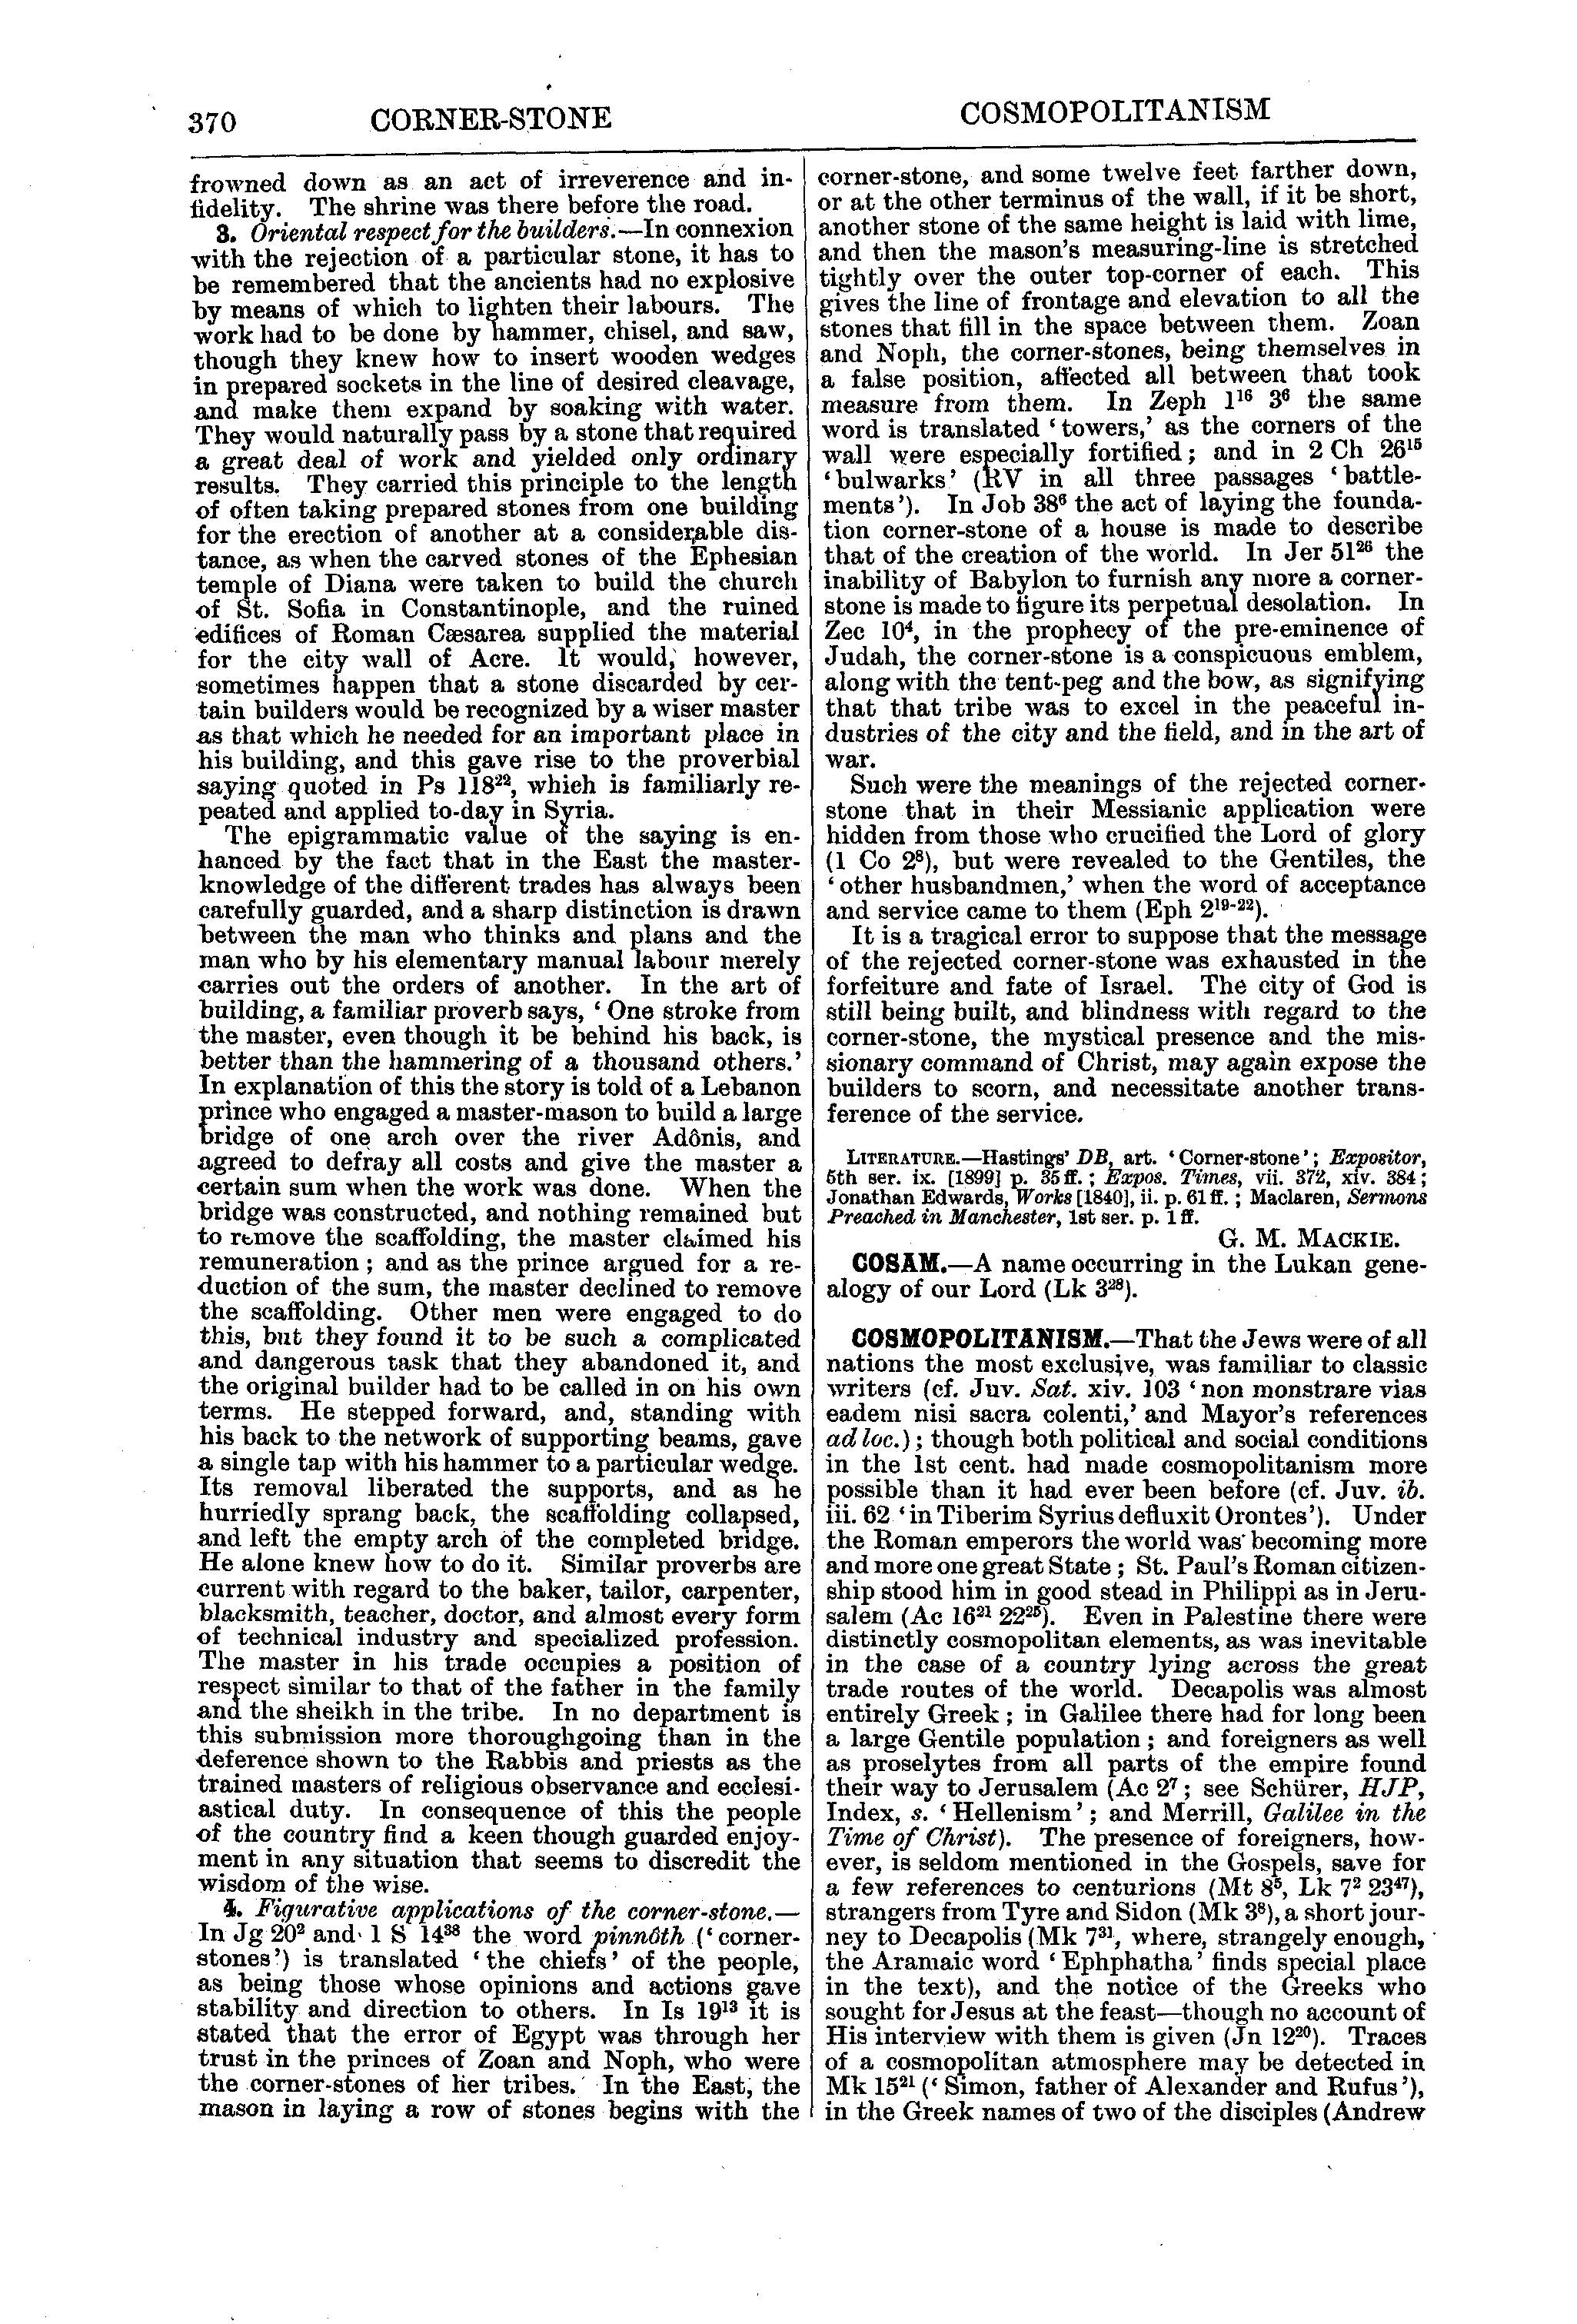 Image of page 370